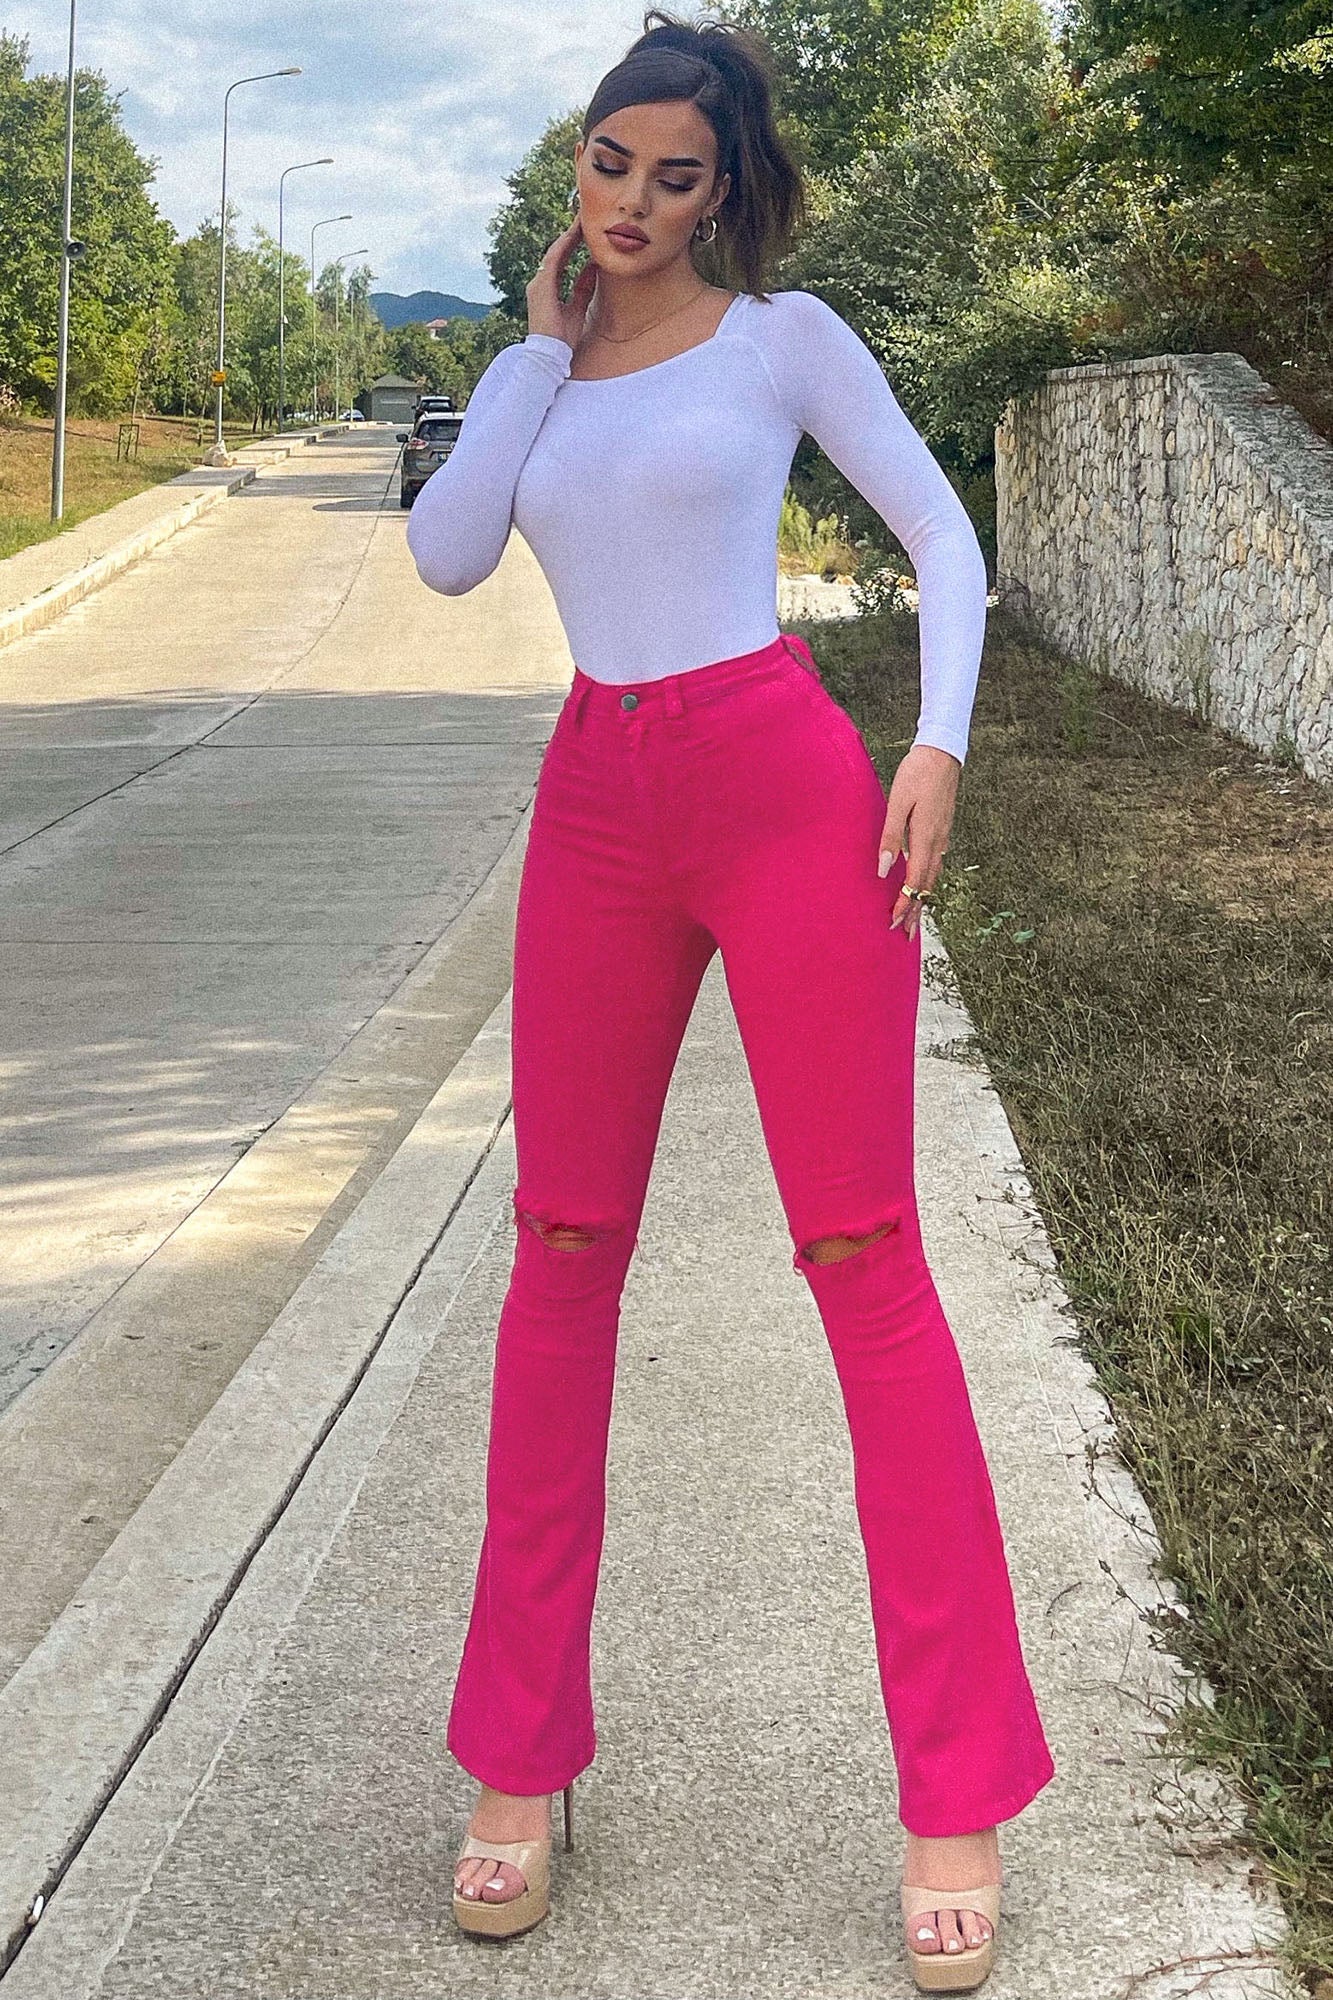 Is Hot Pink Here to Stay?